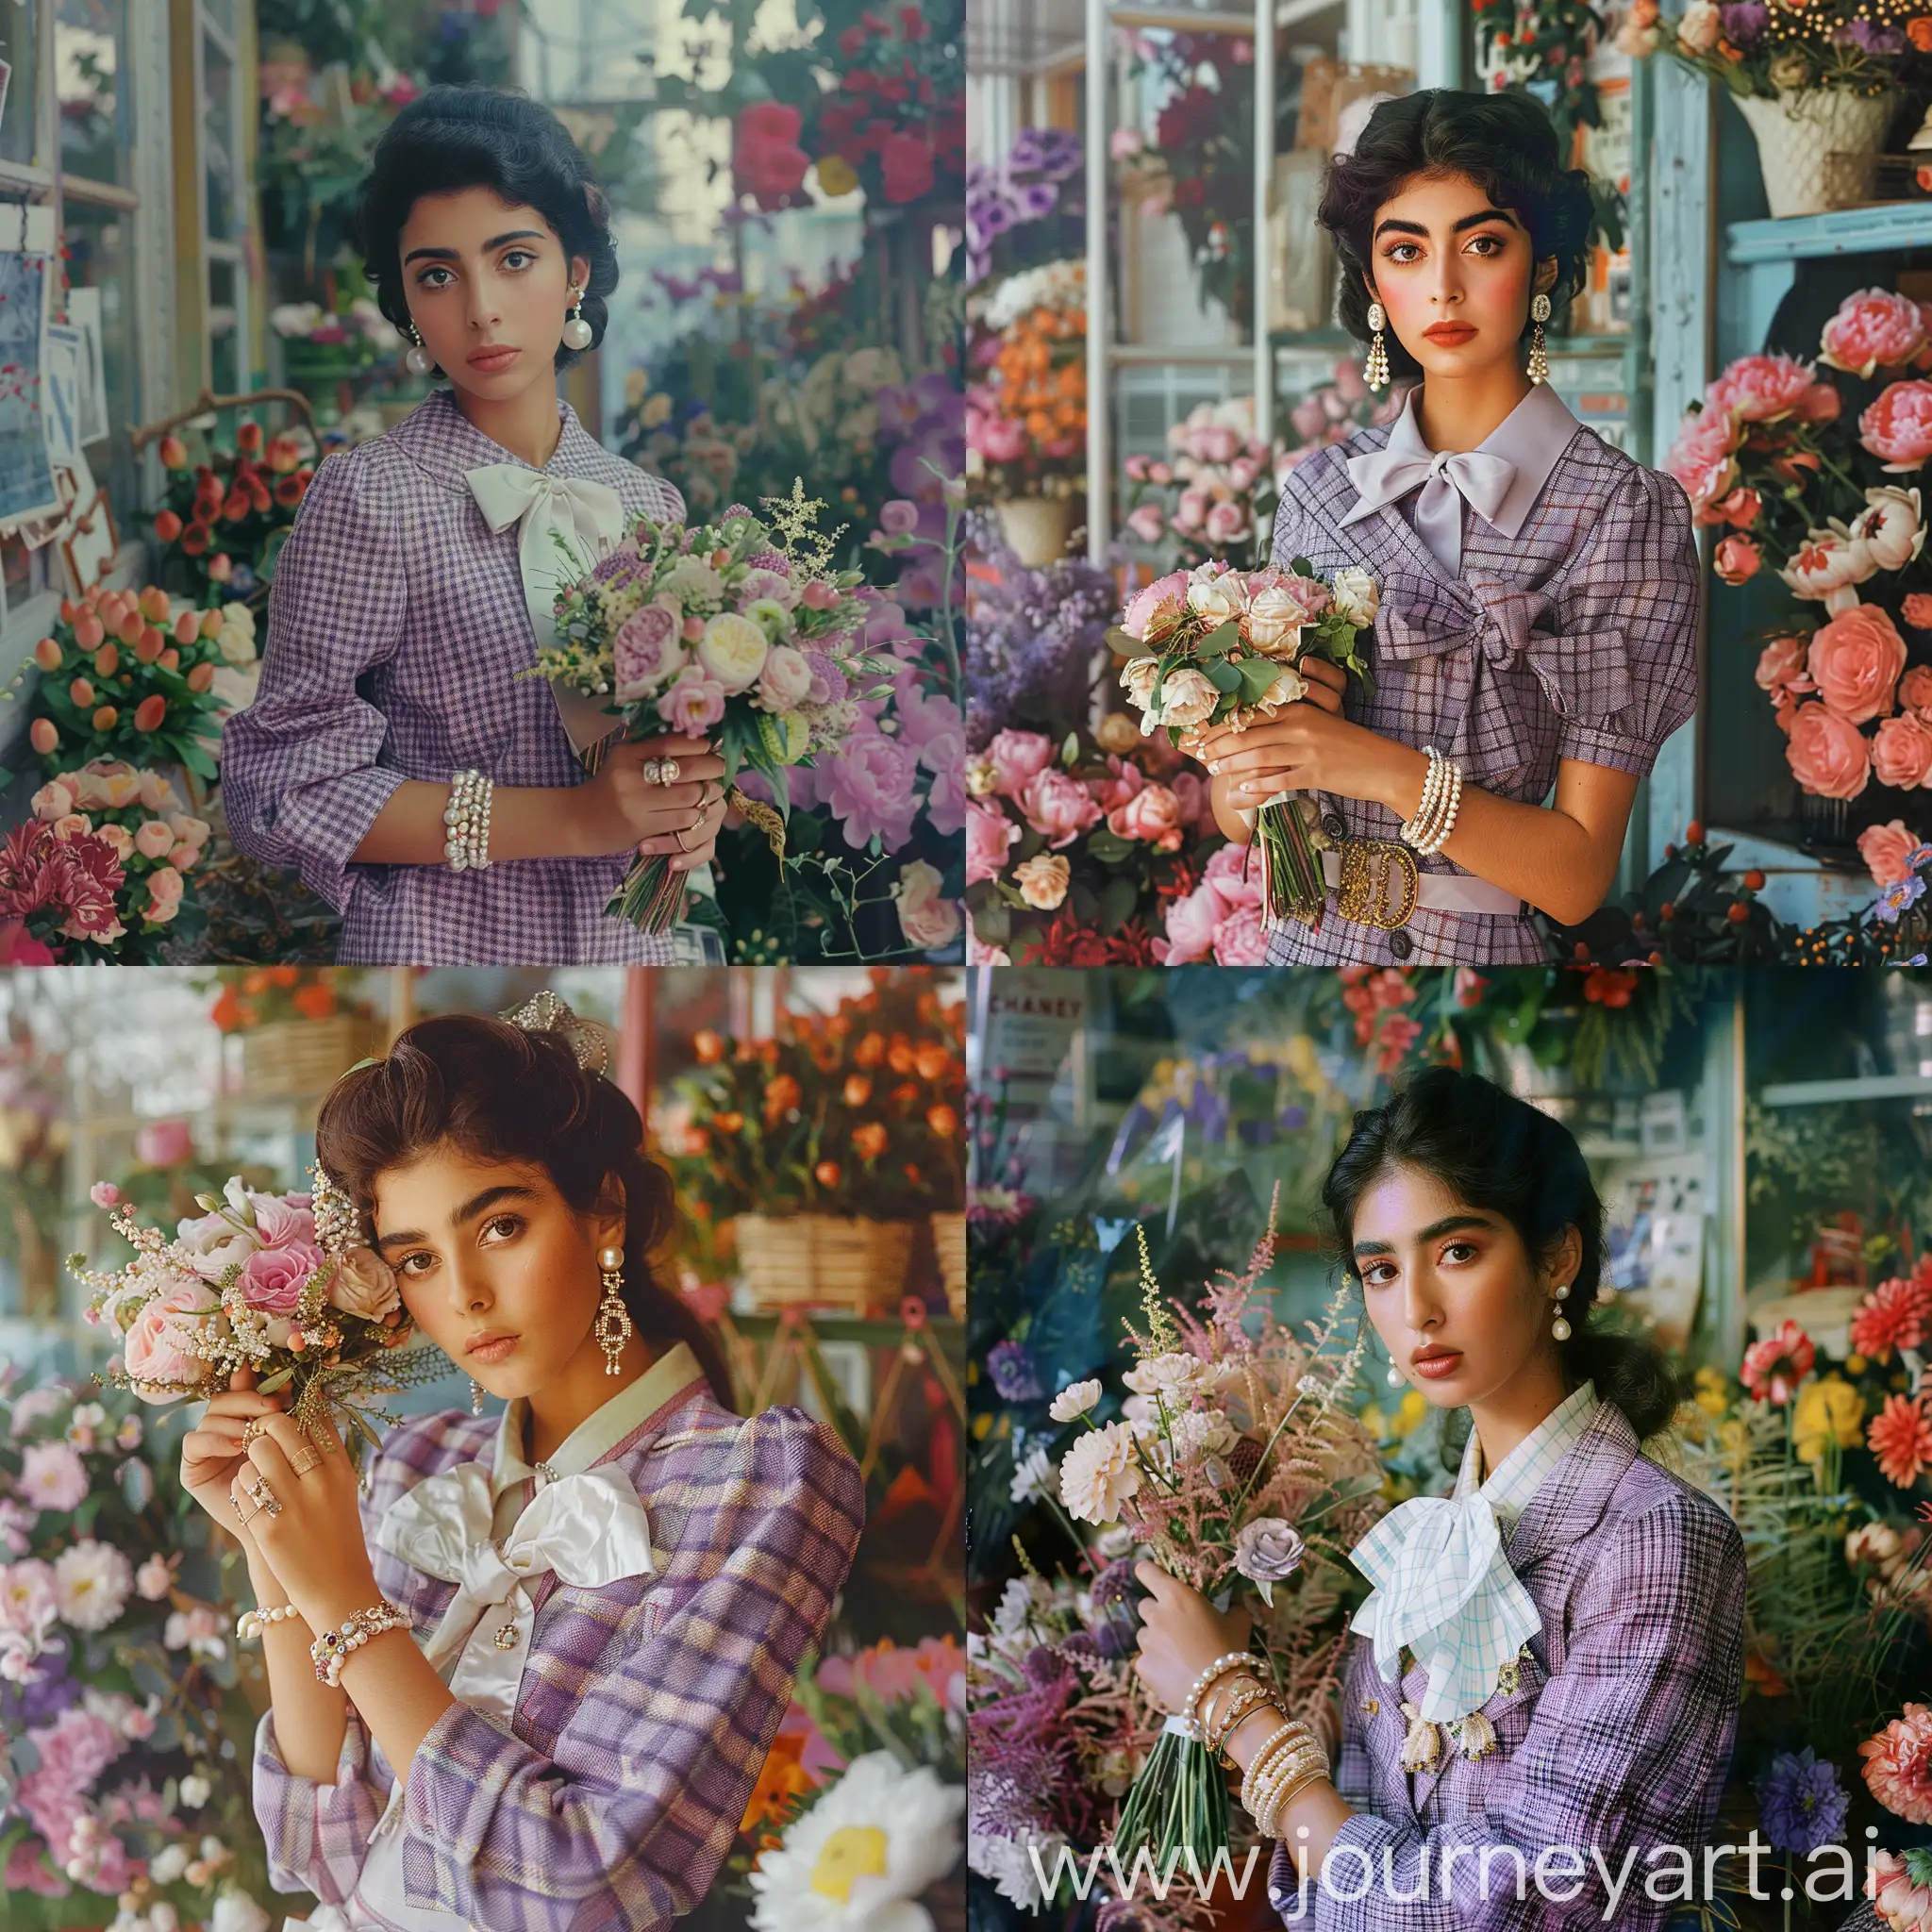 Fashionable-Woman-in-Lilac-Checkered-Tweed-Jacket-with-Bouquet